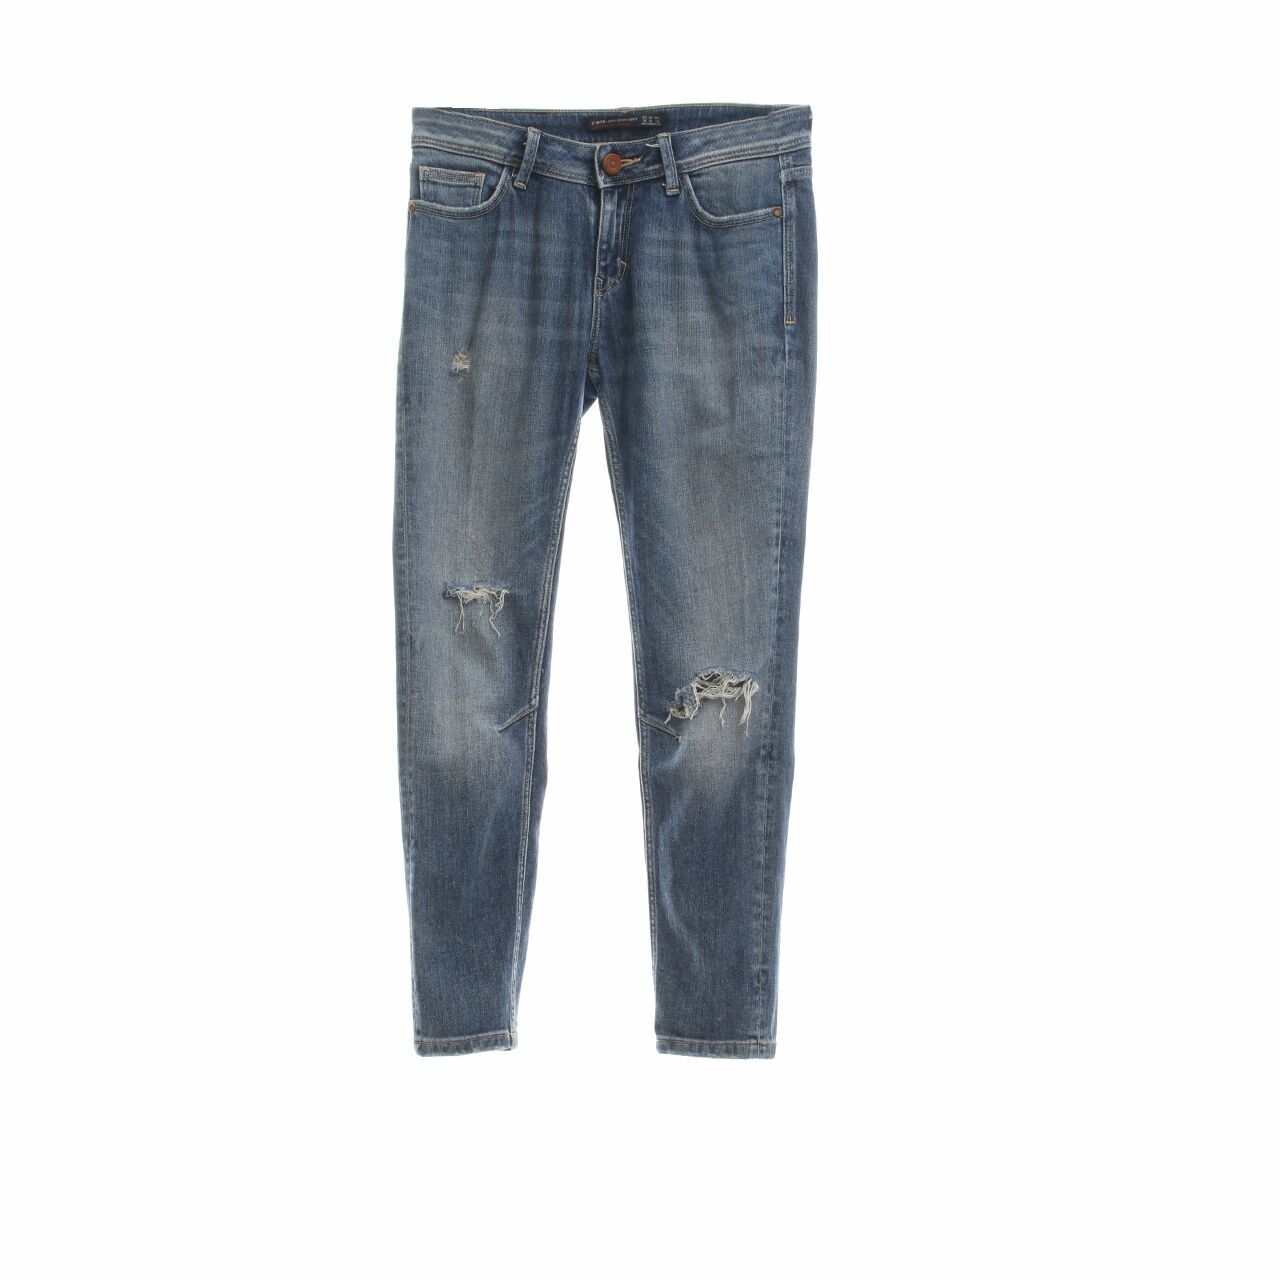 Zara Blue Washed Ripped Jeans 